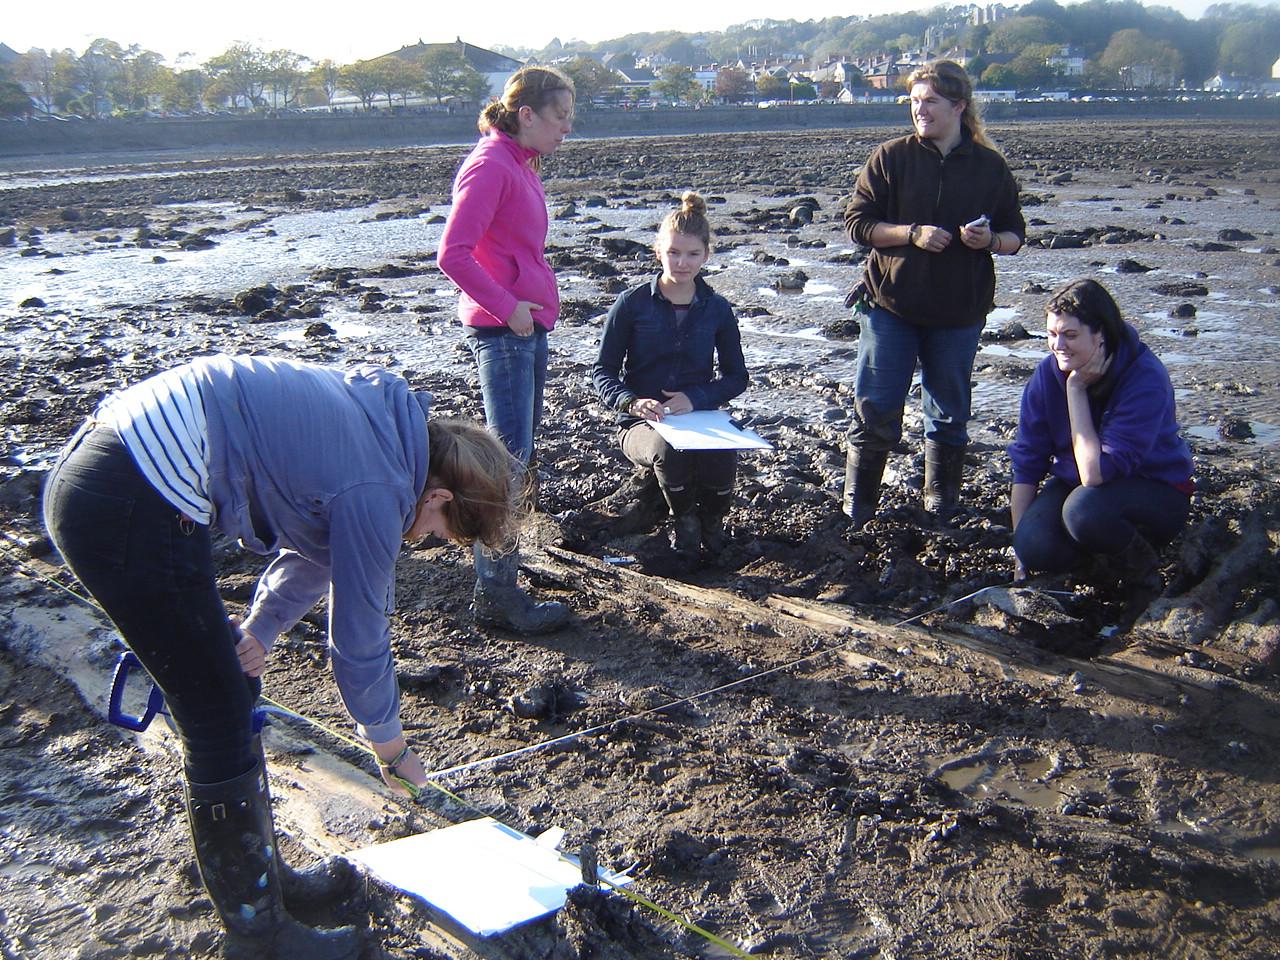 Carrying out an offset survey exercise on one of wrecks on the beach at the Mumbles